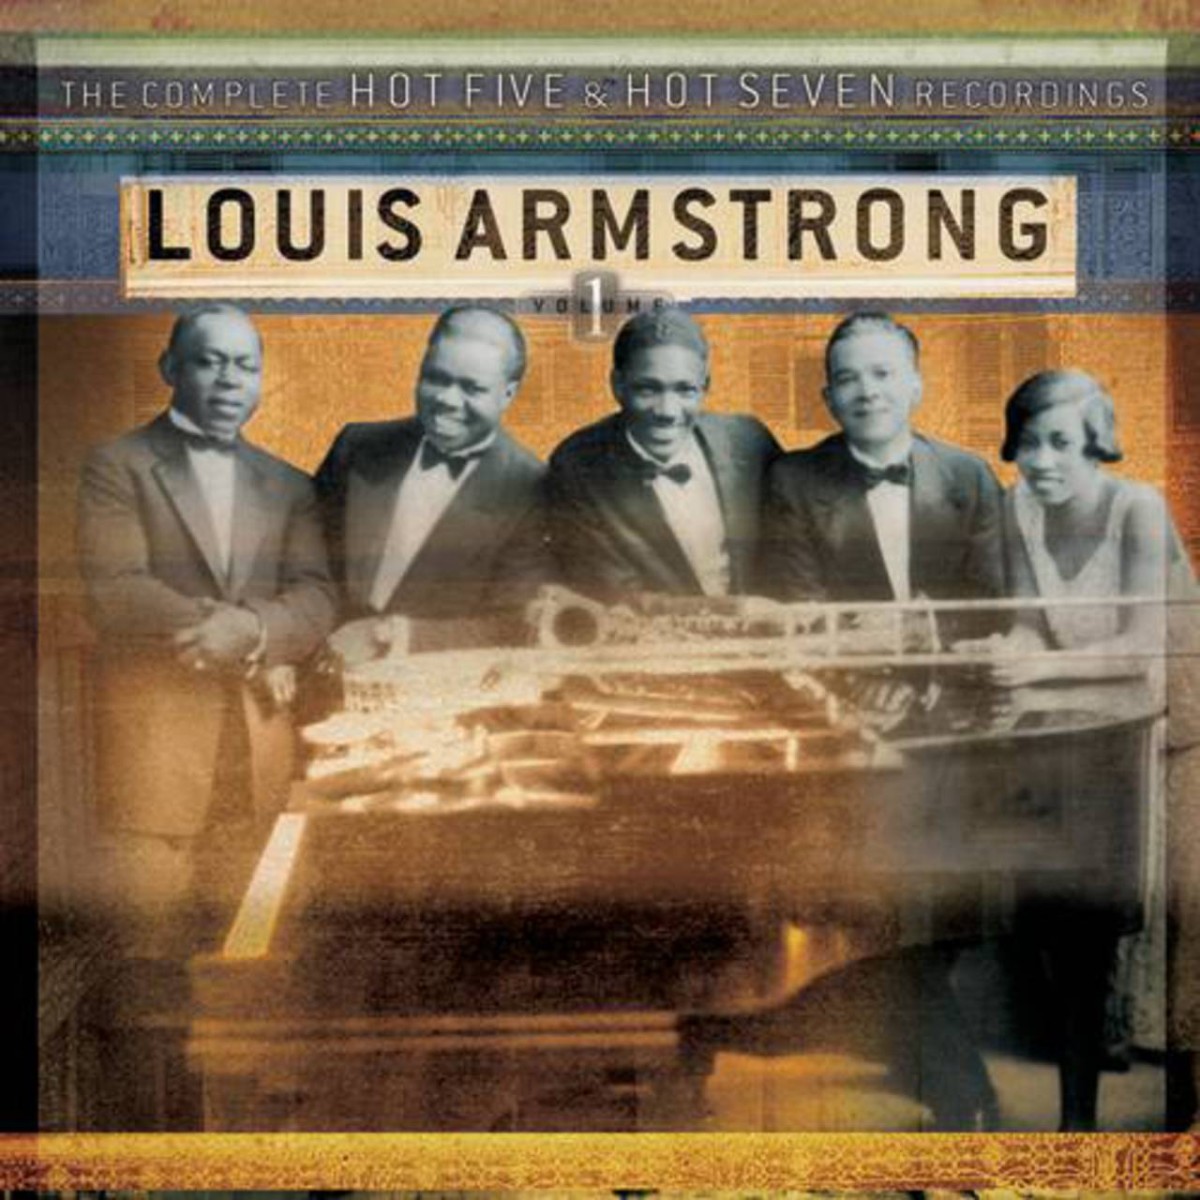 Louis Armstrong — The Complete Hot Five & Hot Seven Recordings, Vol. 1